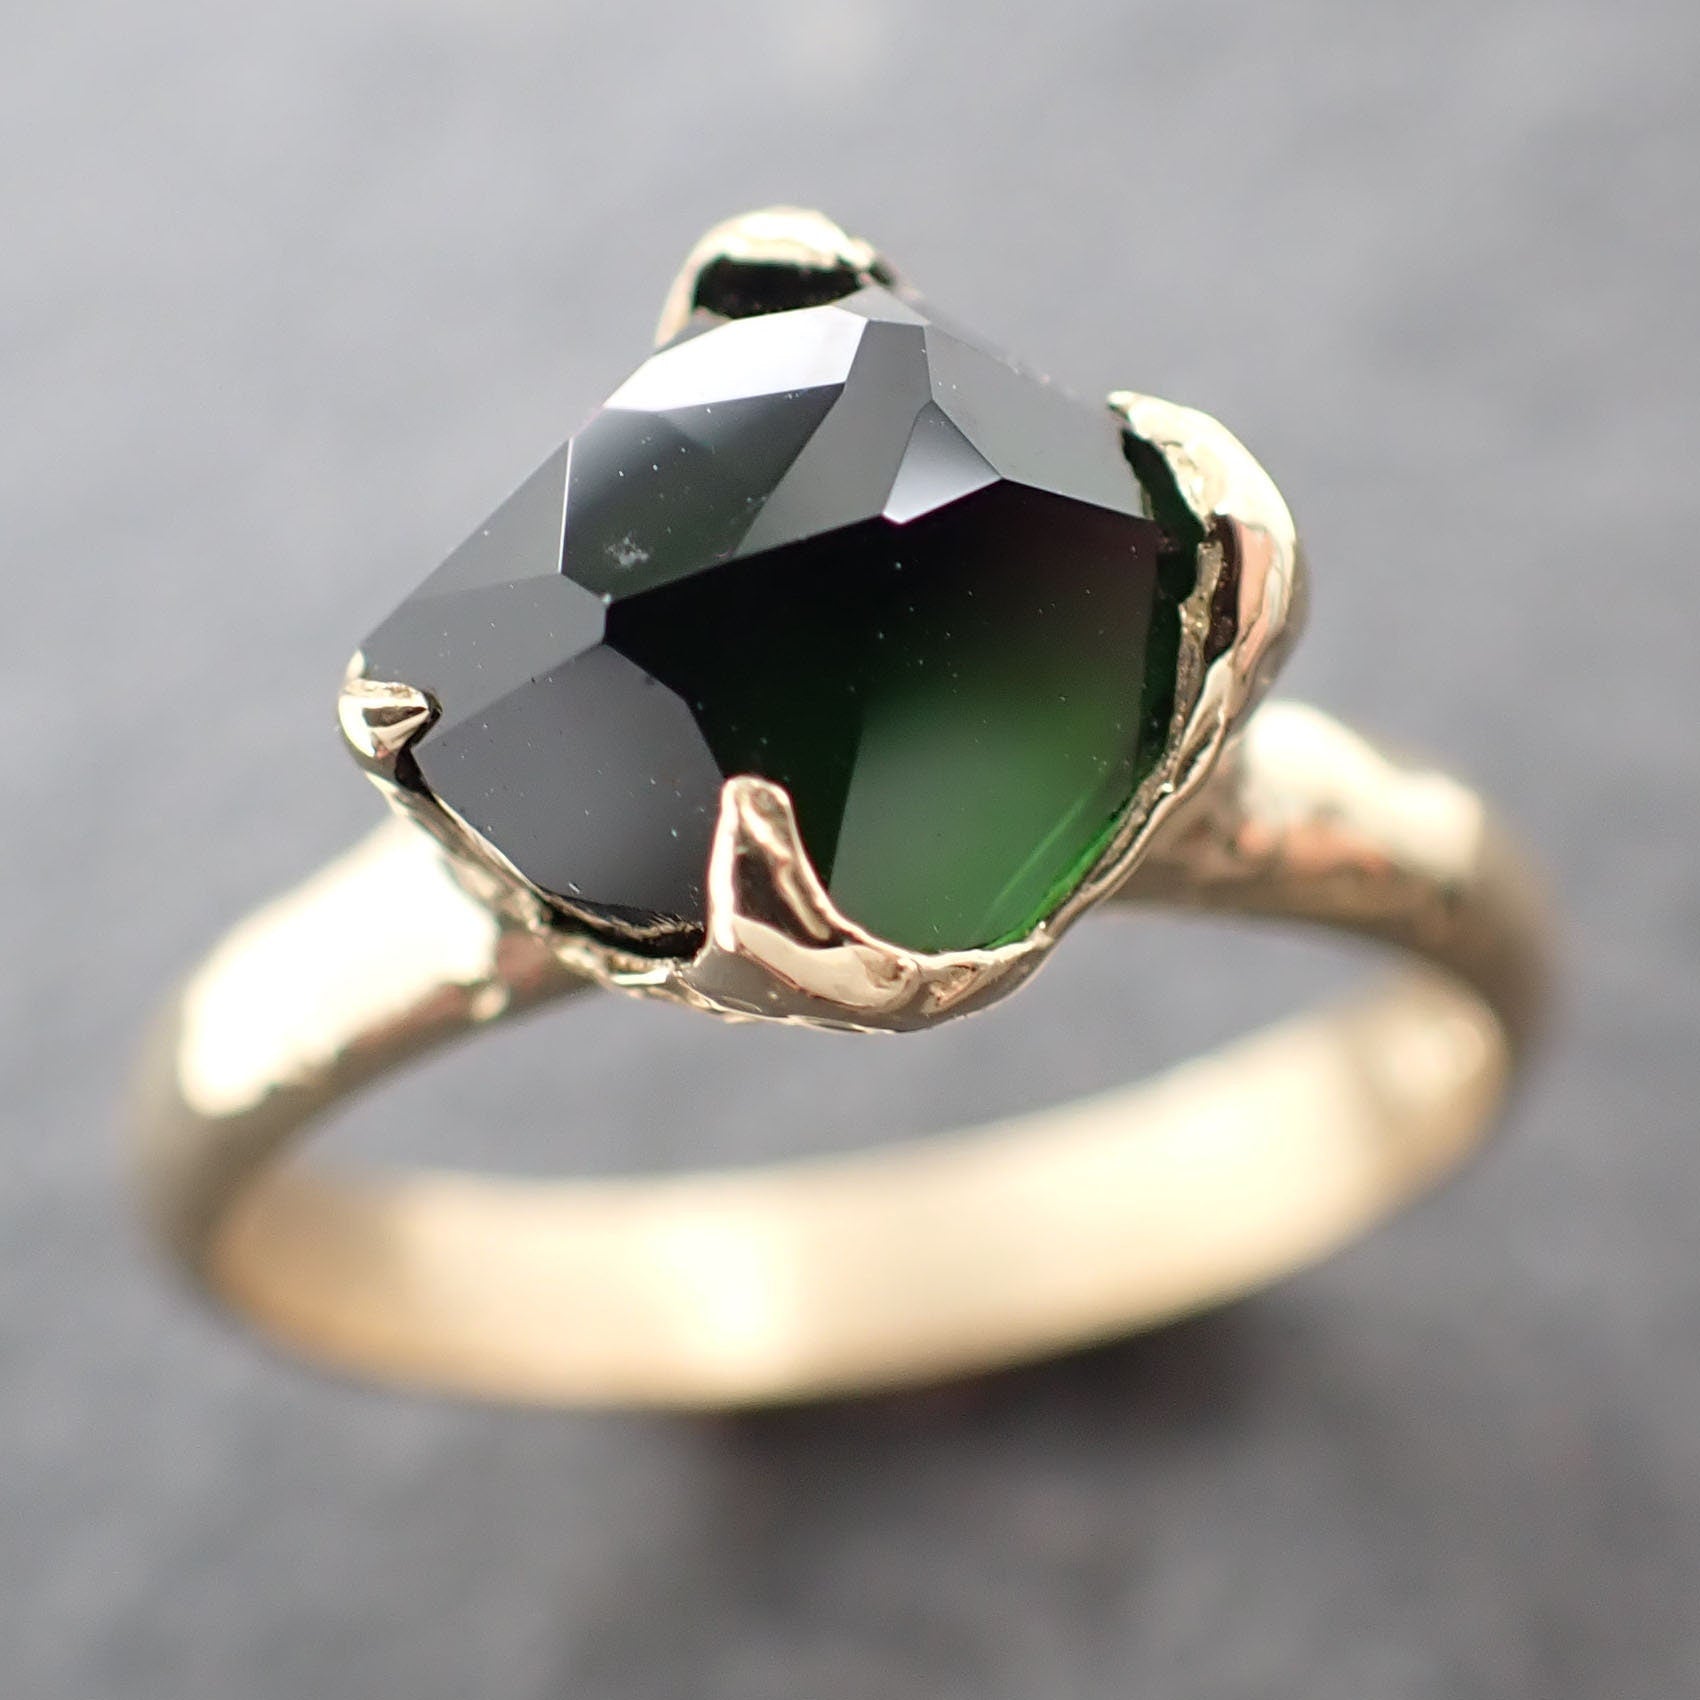 Partially faceted Solitaire Green Tourmaline 18k Gold Engagement Ring One Of a Kind Gemstone Ring byAngeline 3034